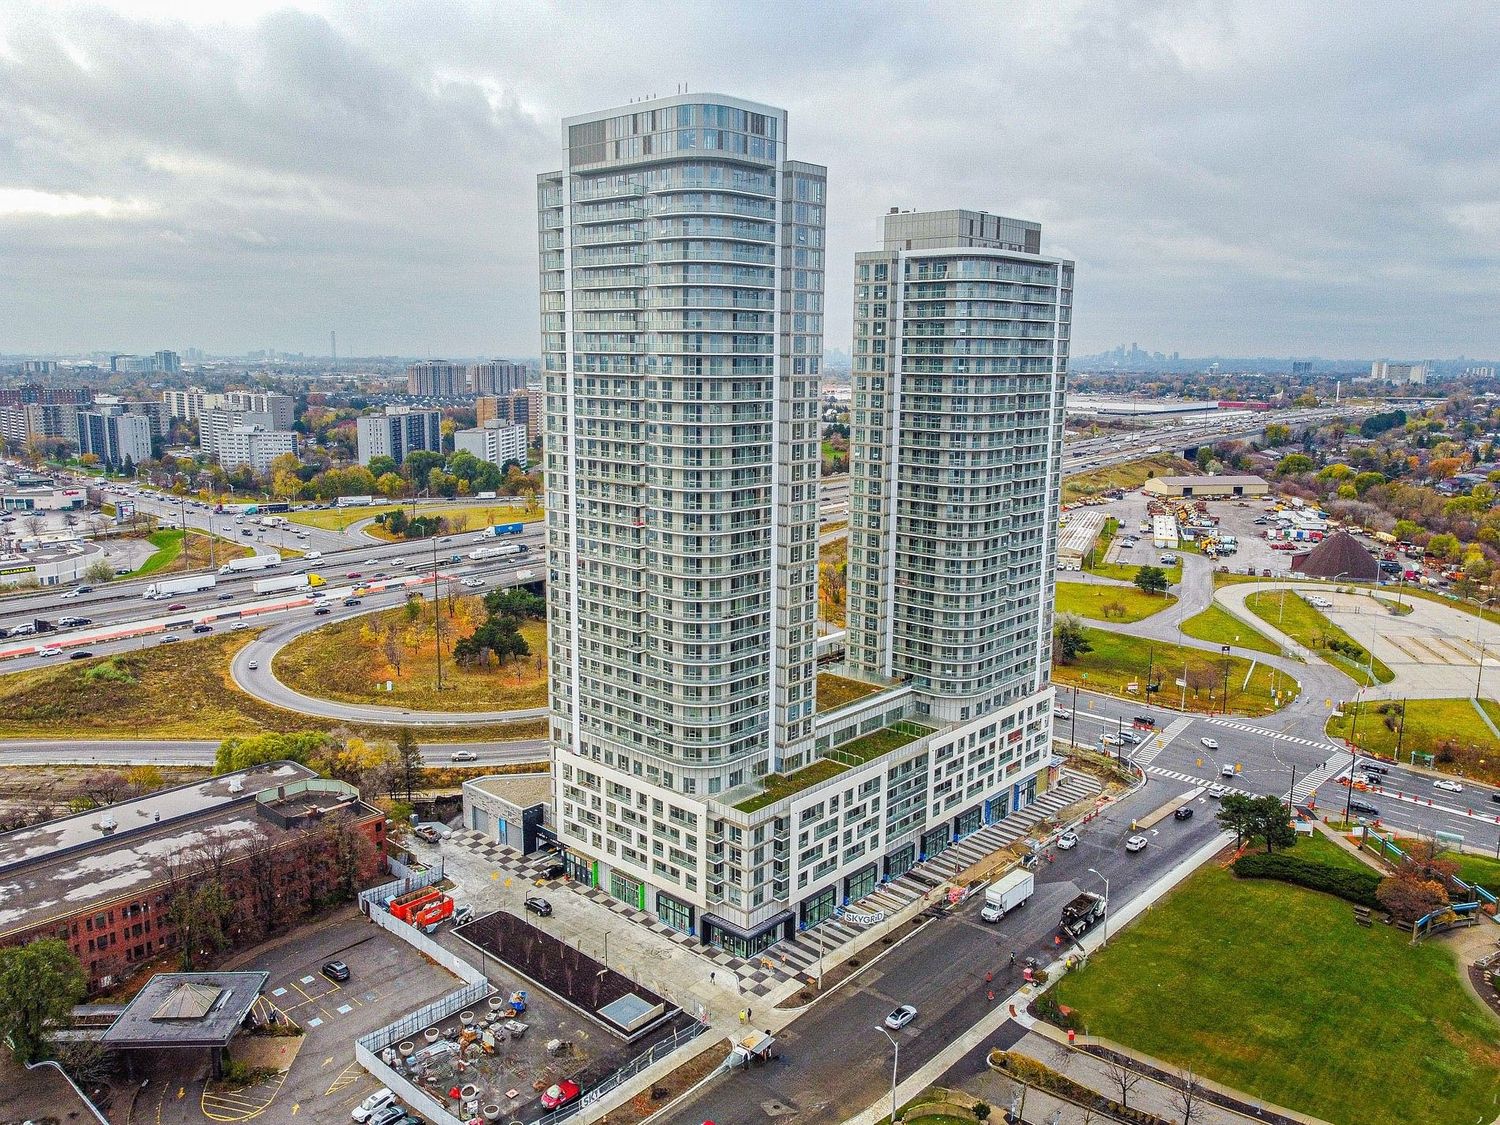 2031-2035 Kennedy Road. KSquare Condos is located in  Scarborough, Toronto - image #1 of 6